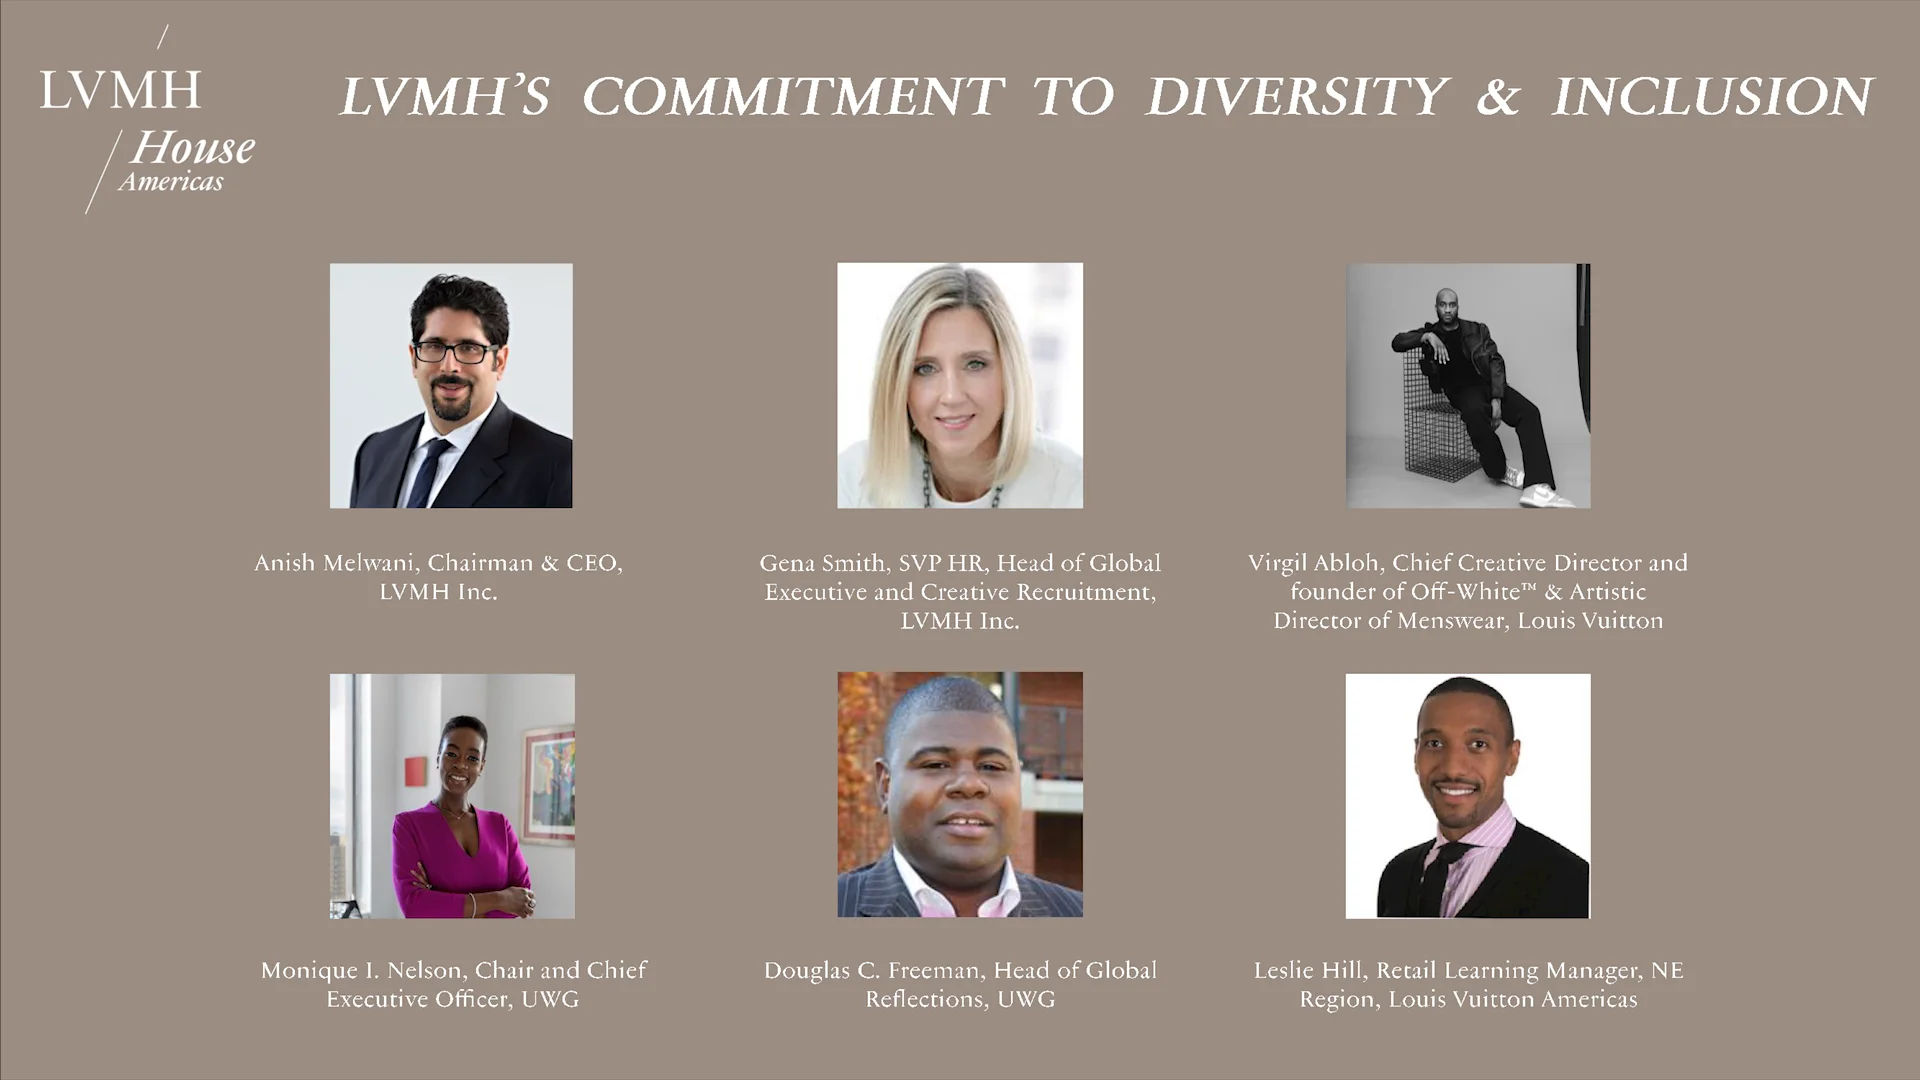 LVMH's Commitment to Diversity & Inclusion featuring Virgil Abloh on Vimeo